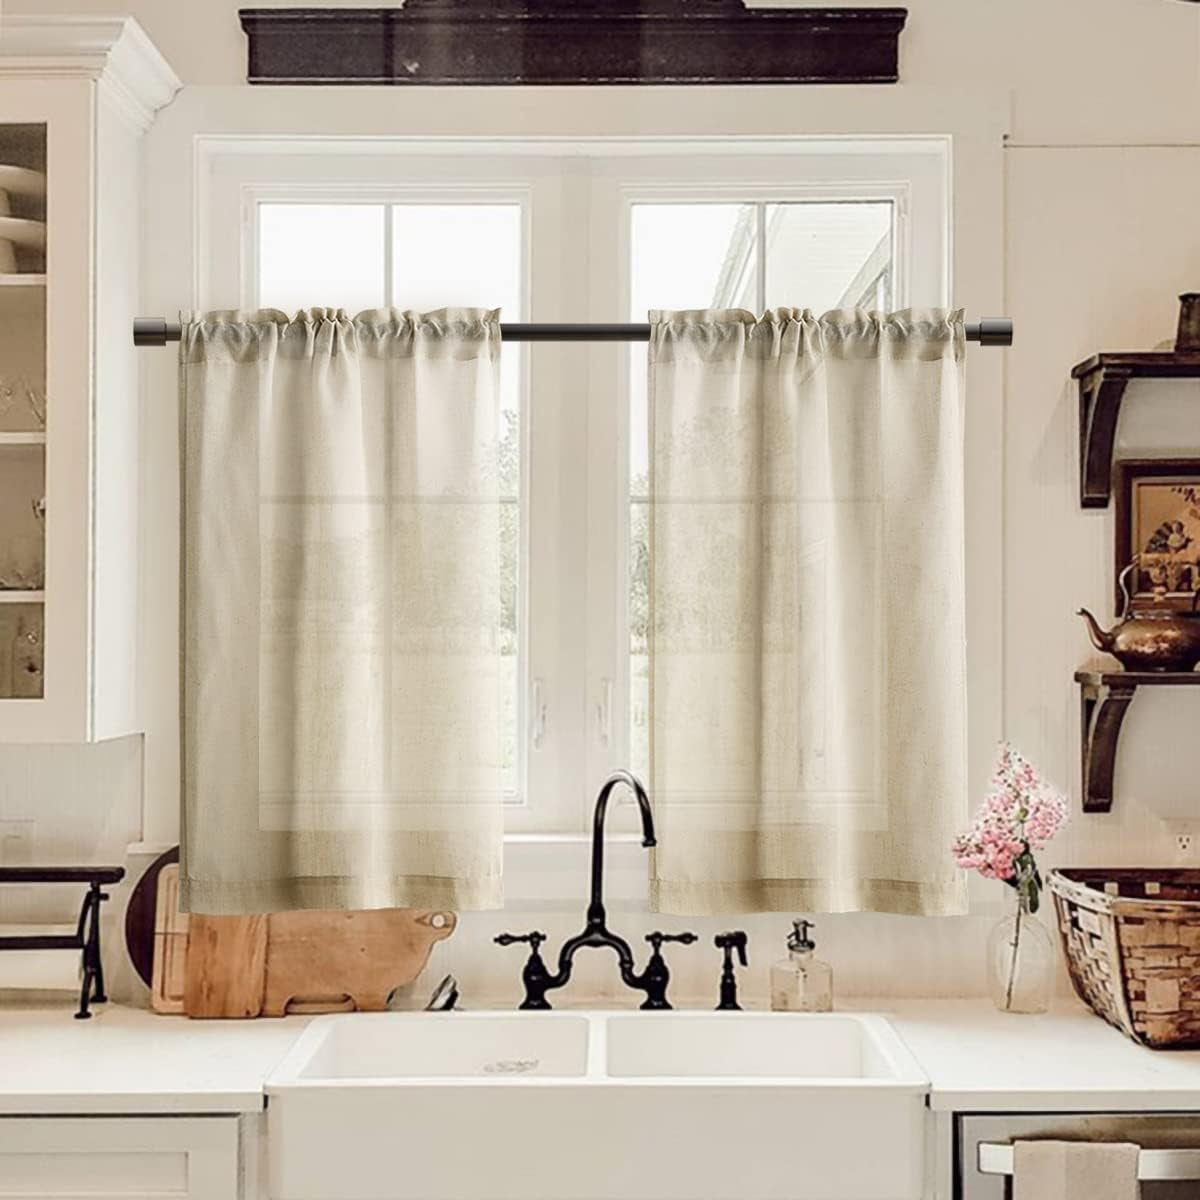 XTMYI off White Semi Sheer Short Curtains Rod Pocket Kitchen Neutral Linen Textured Casual Weave Cafe Half Cream Ivory Small Window Treatments 36 Inches Long for Travel Bathroom Laundry Room 2 Panels  XTMYI TEXTILE Linen 26X24 